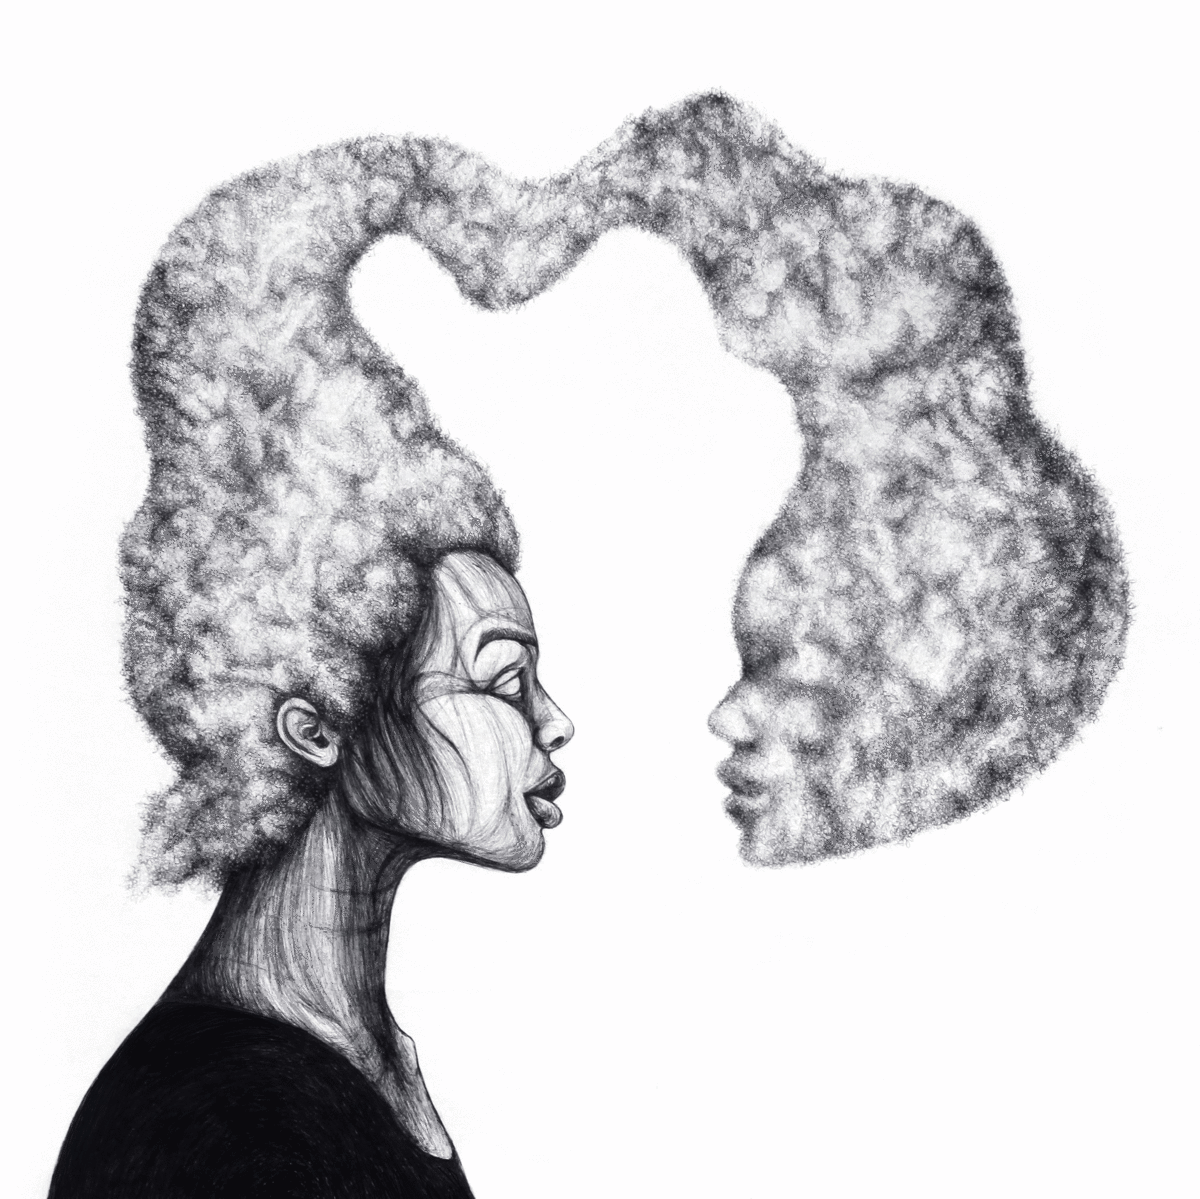 A line drawing of a figure in profile, with hair that is creating a cloud shape and appears to be looking at the face. The drawing is animated subtly to show the person blinking.